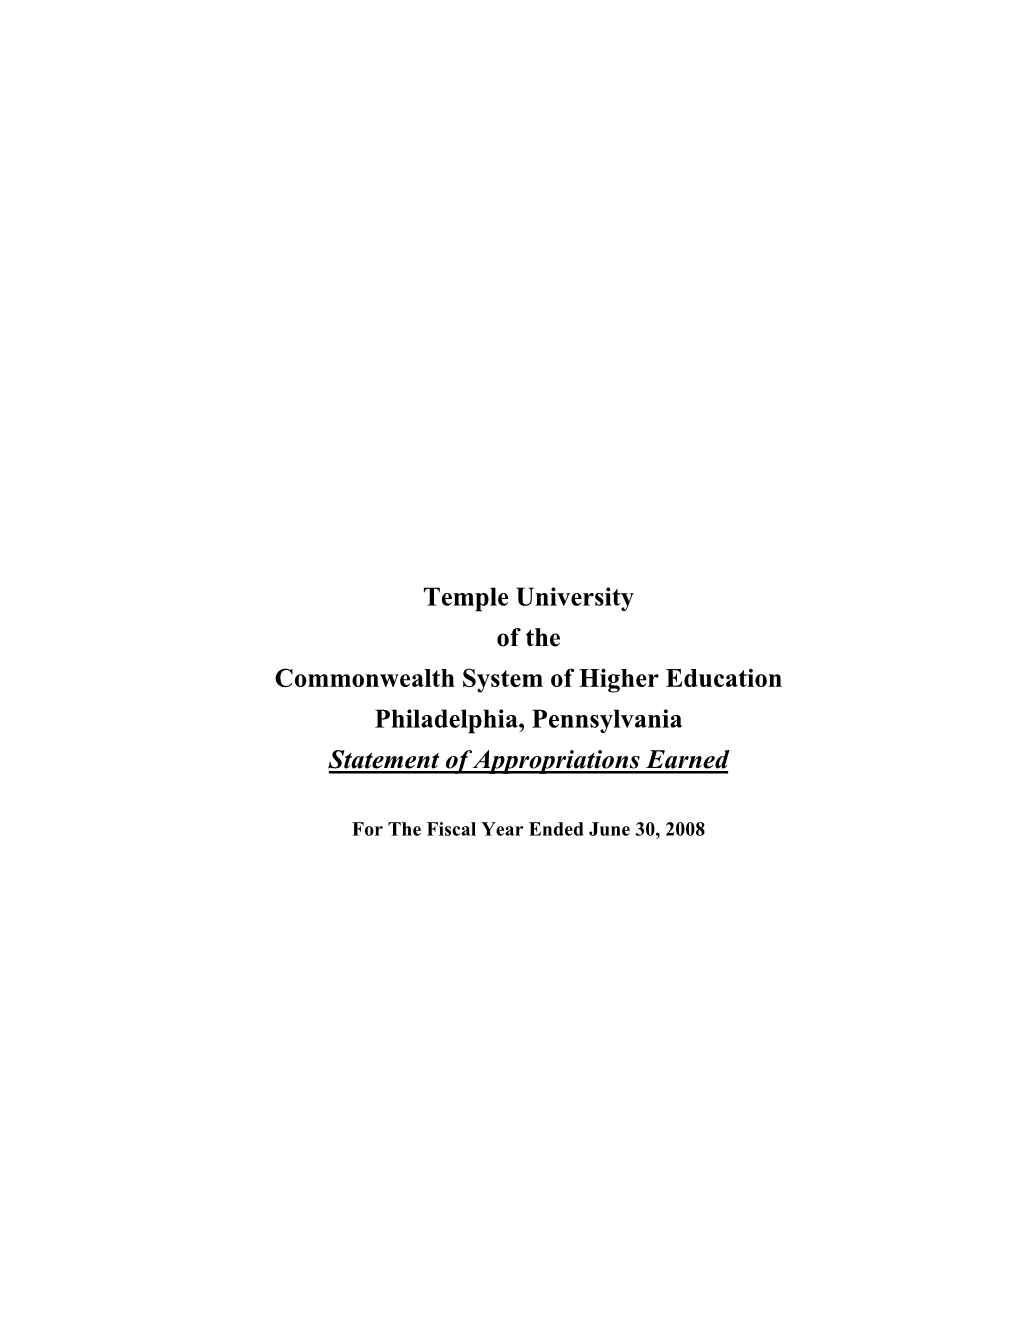 Temple University of the Commonwealth System of Higher Education Philadelphia, Pennsylvania Statement of Appropriations Earned